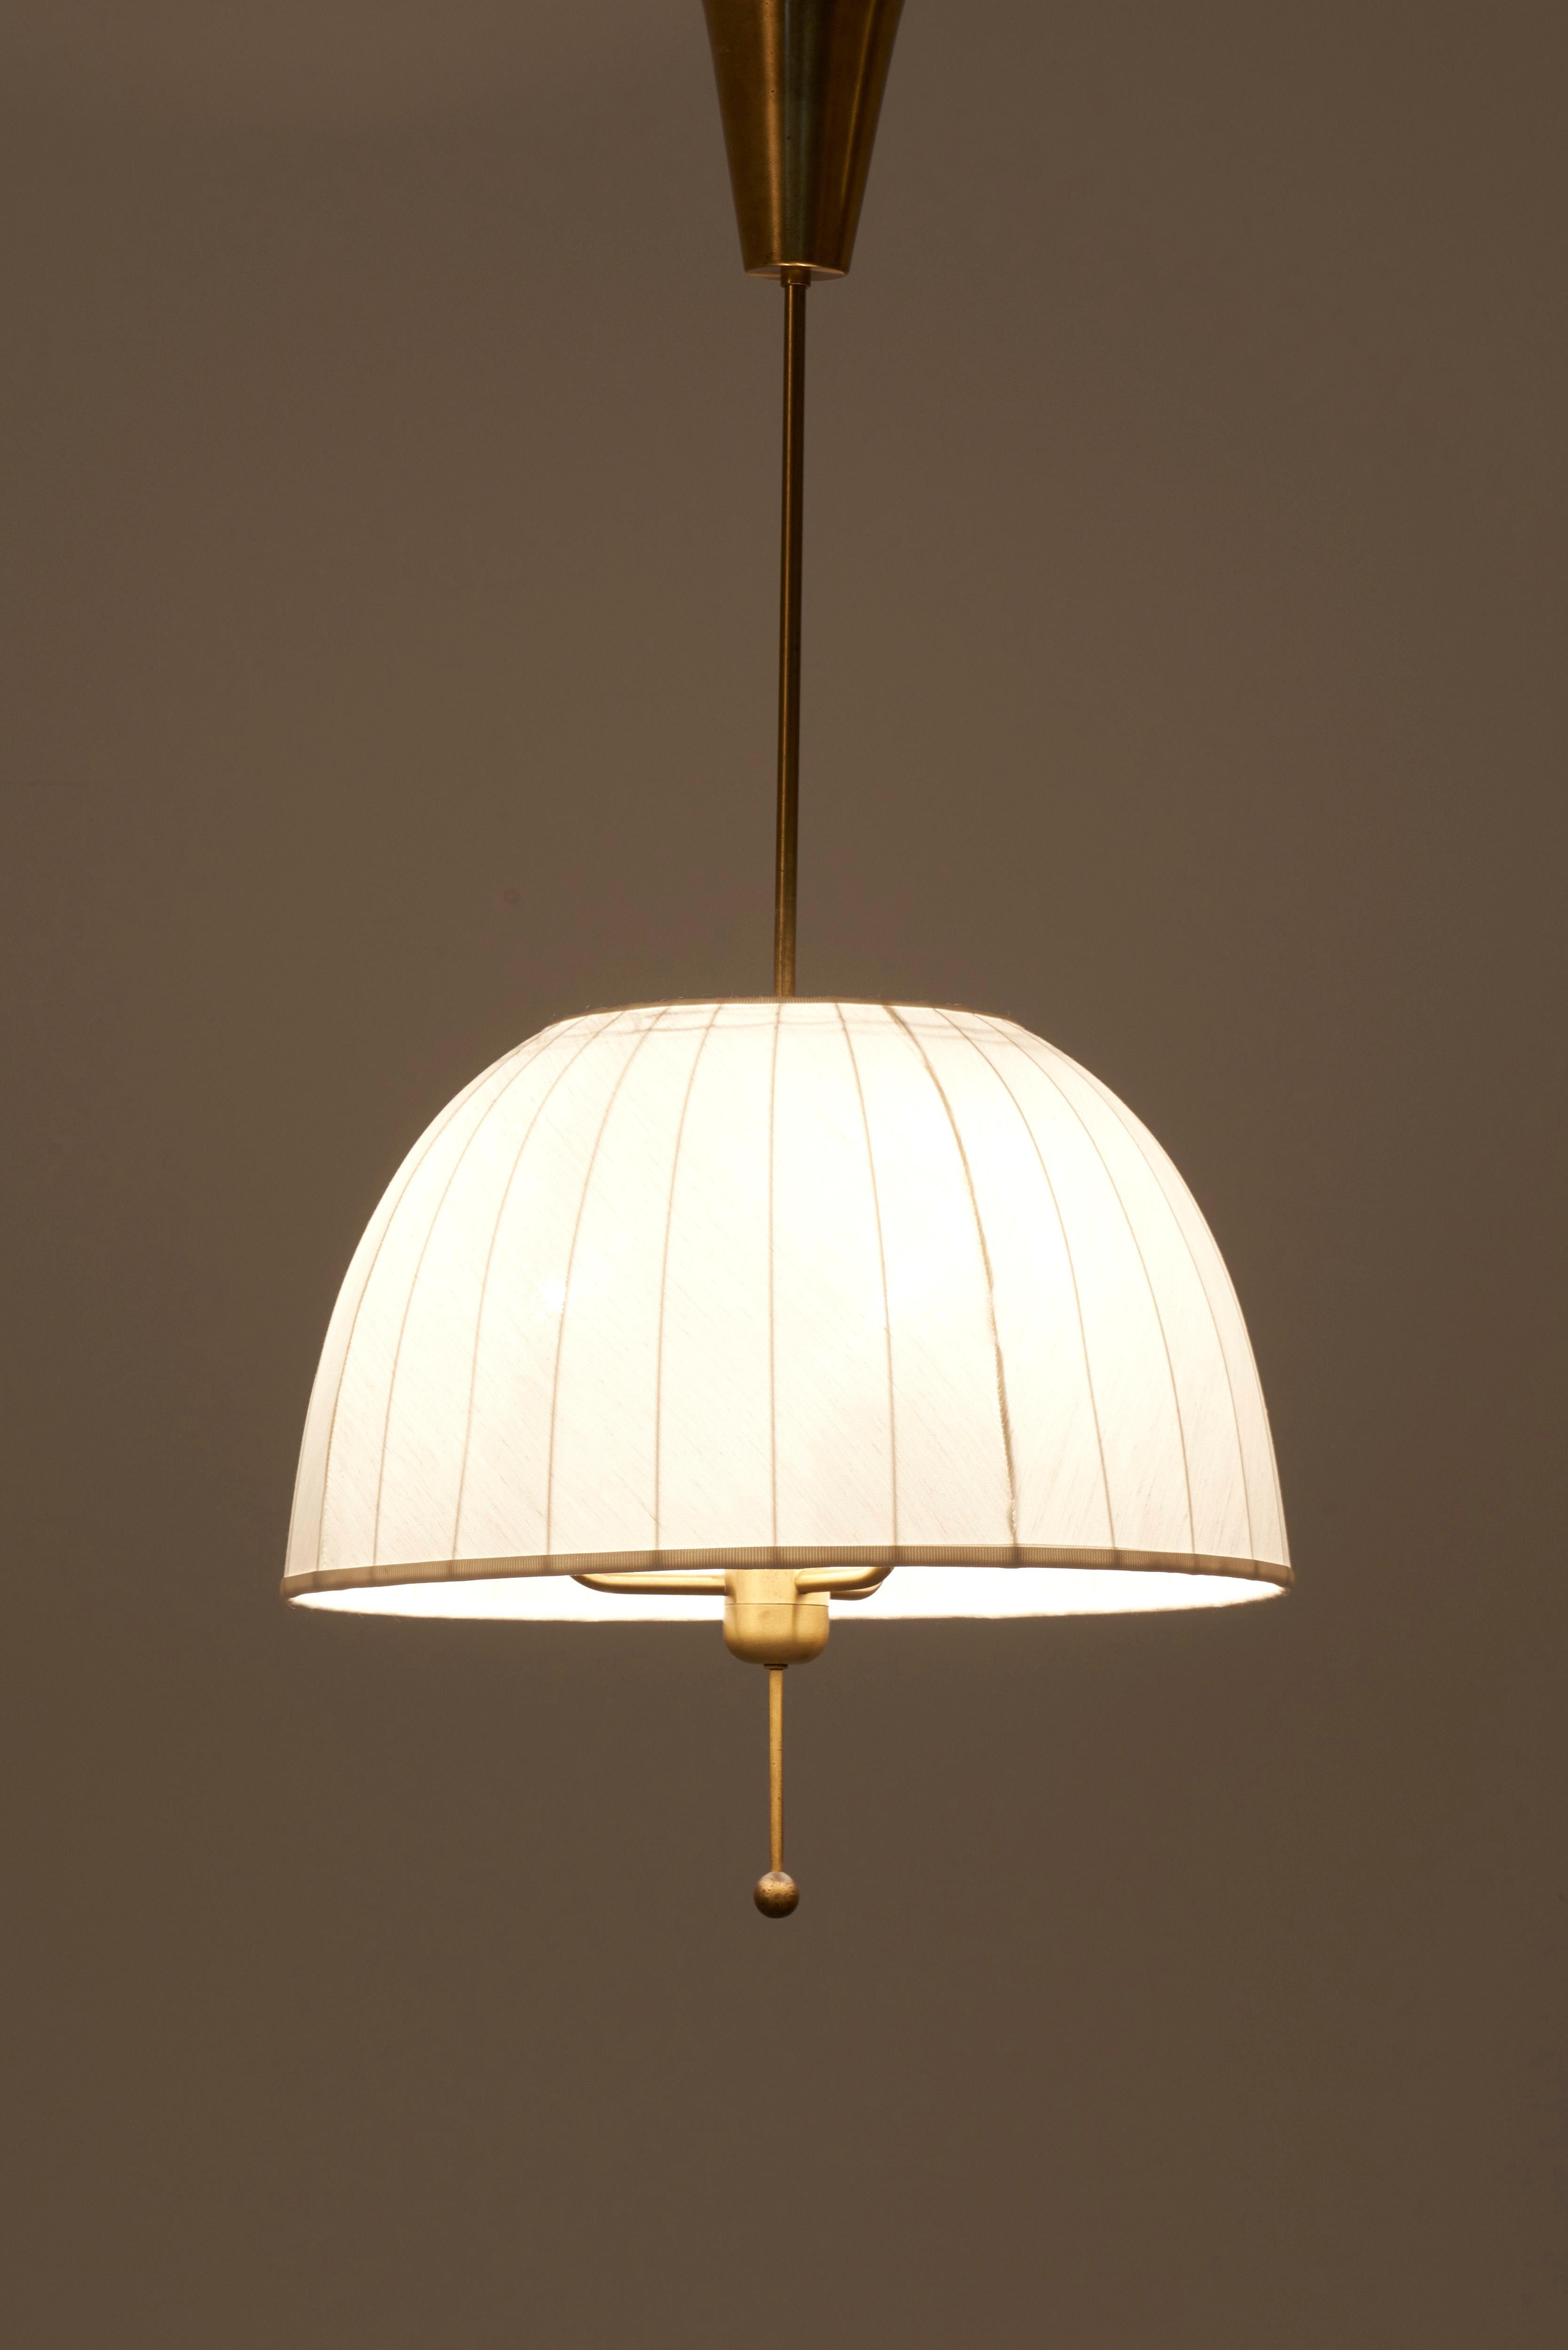 Pendant lamp, model T549, in brass designed by Hans-Agne Jakobsson in 1960s and manufactured by AB Markaryd in Sweden. The fabric of the lamp shade in off-white chintz is new.

3 x E27 sockets.

Please note: Lamp should be fitted professionally